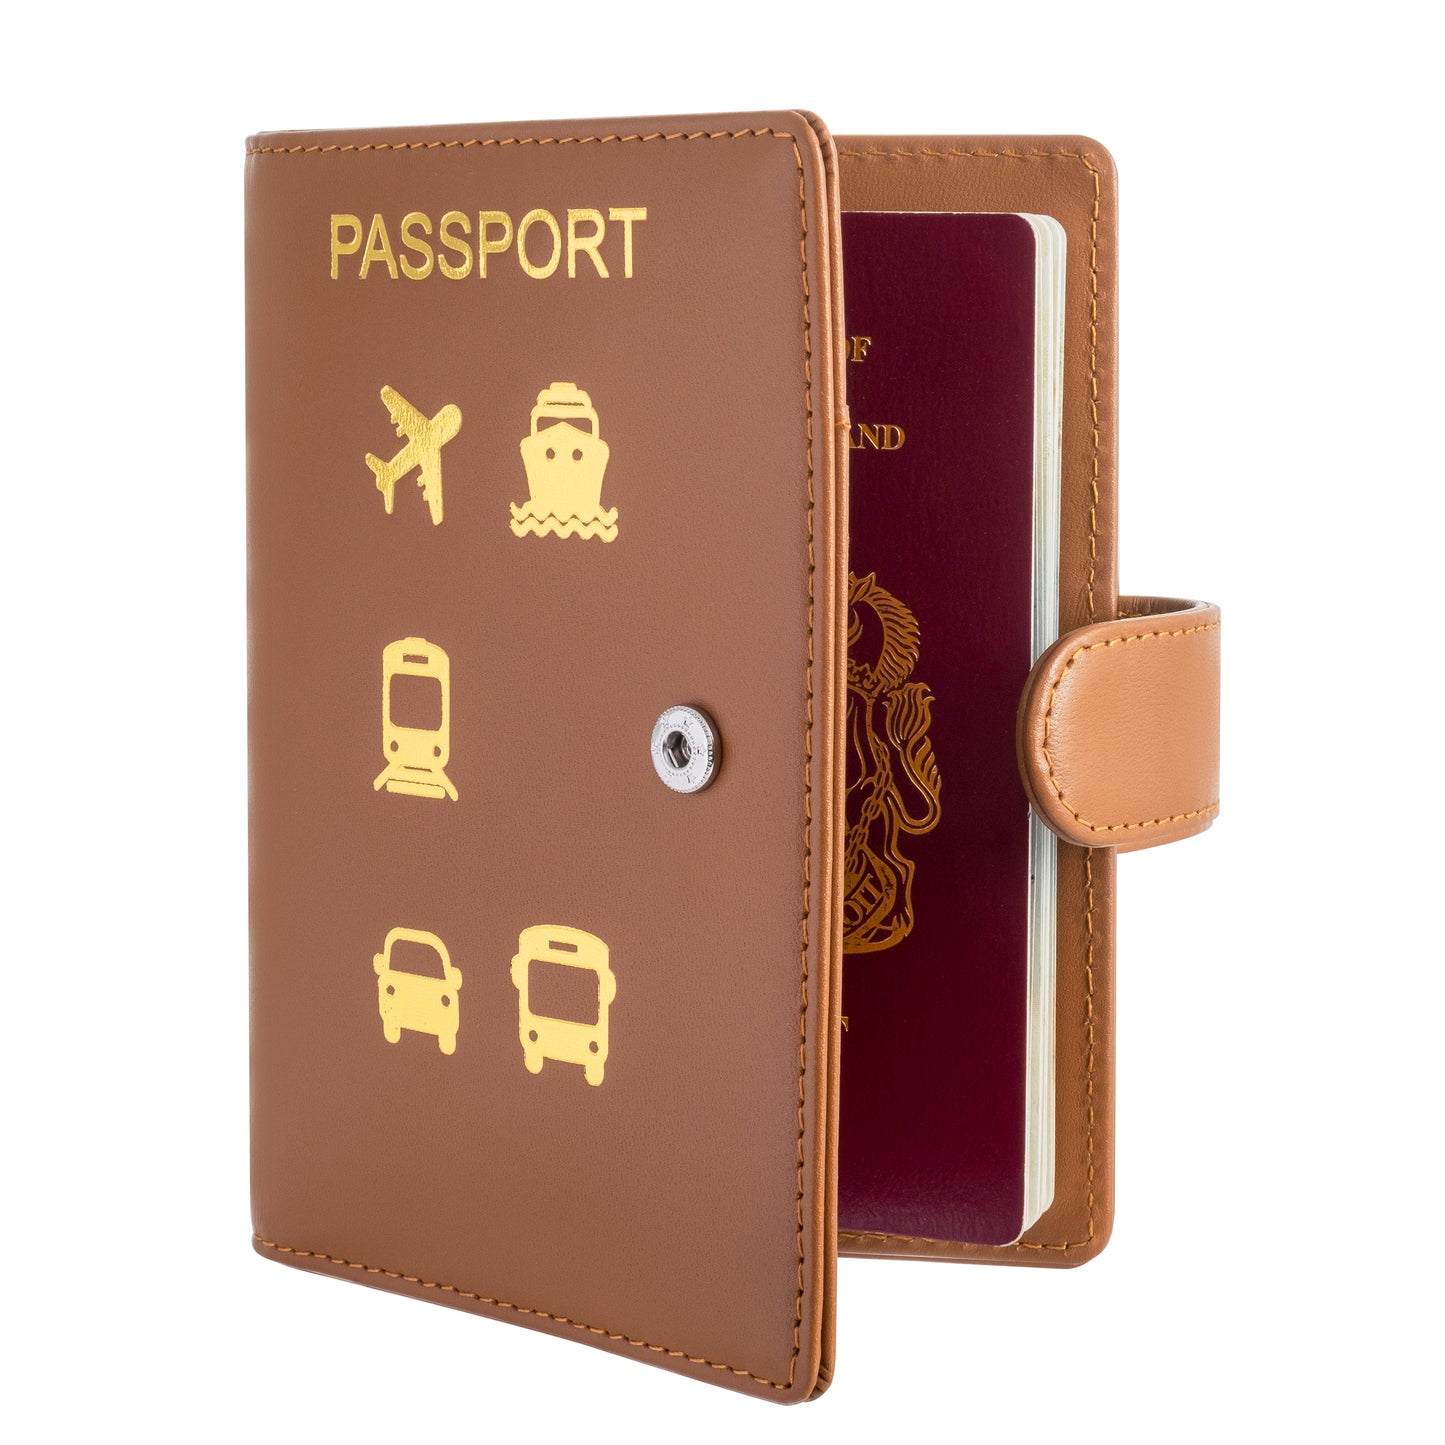 HEEDFULL - AirTag Compatible, Vegan, Faux, PU Leather Passport Cover Wallet - Stylish, Premium Quality - AirTag is Not Included